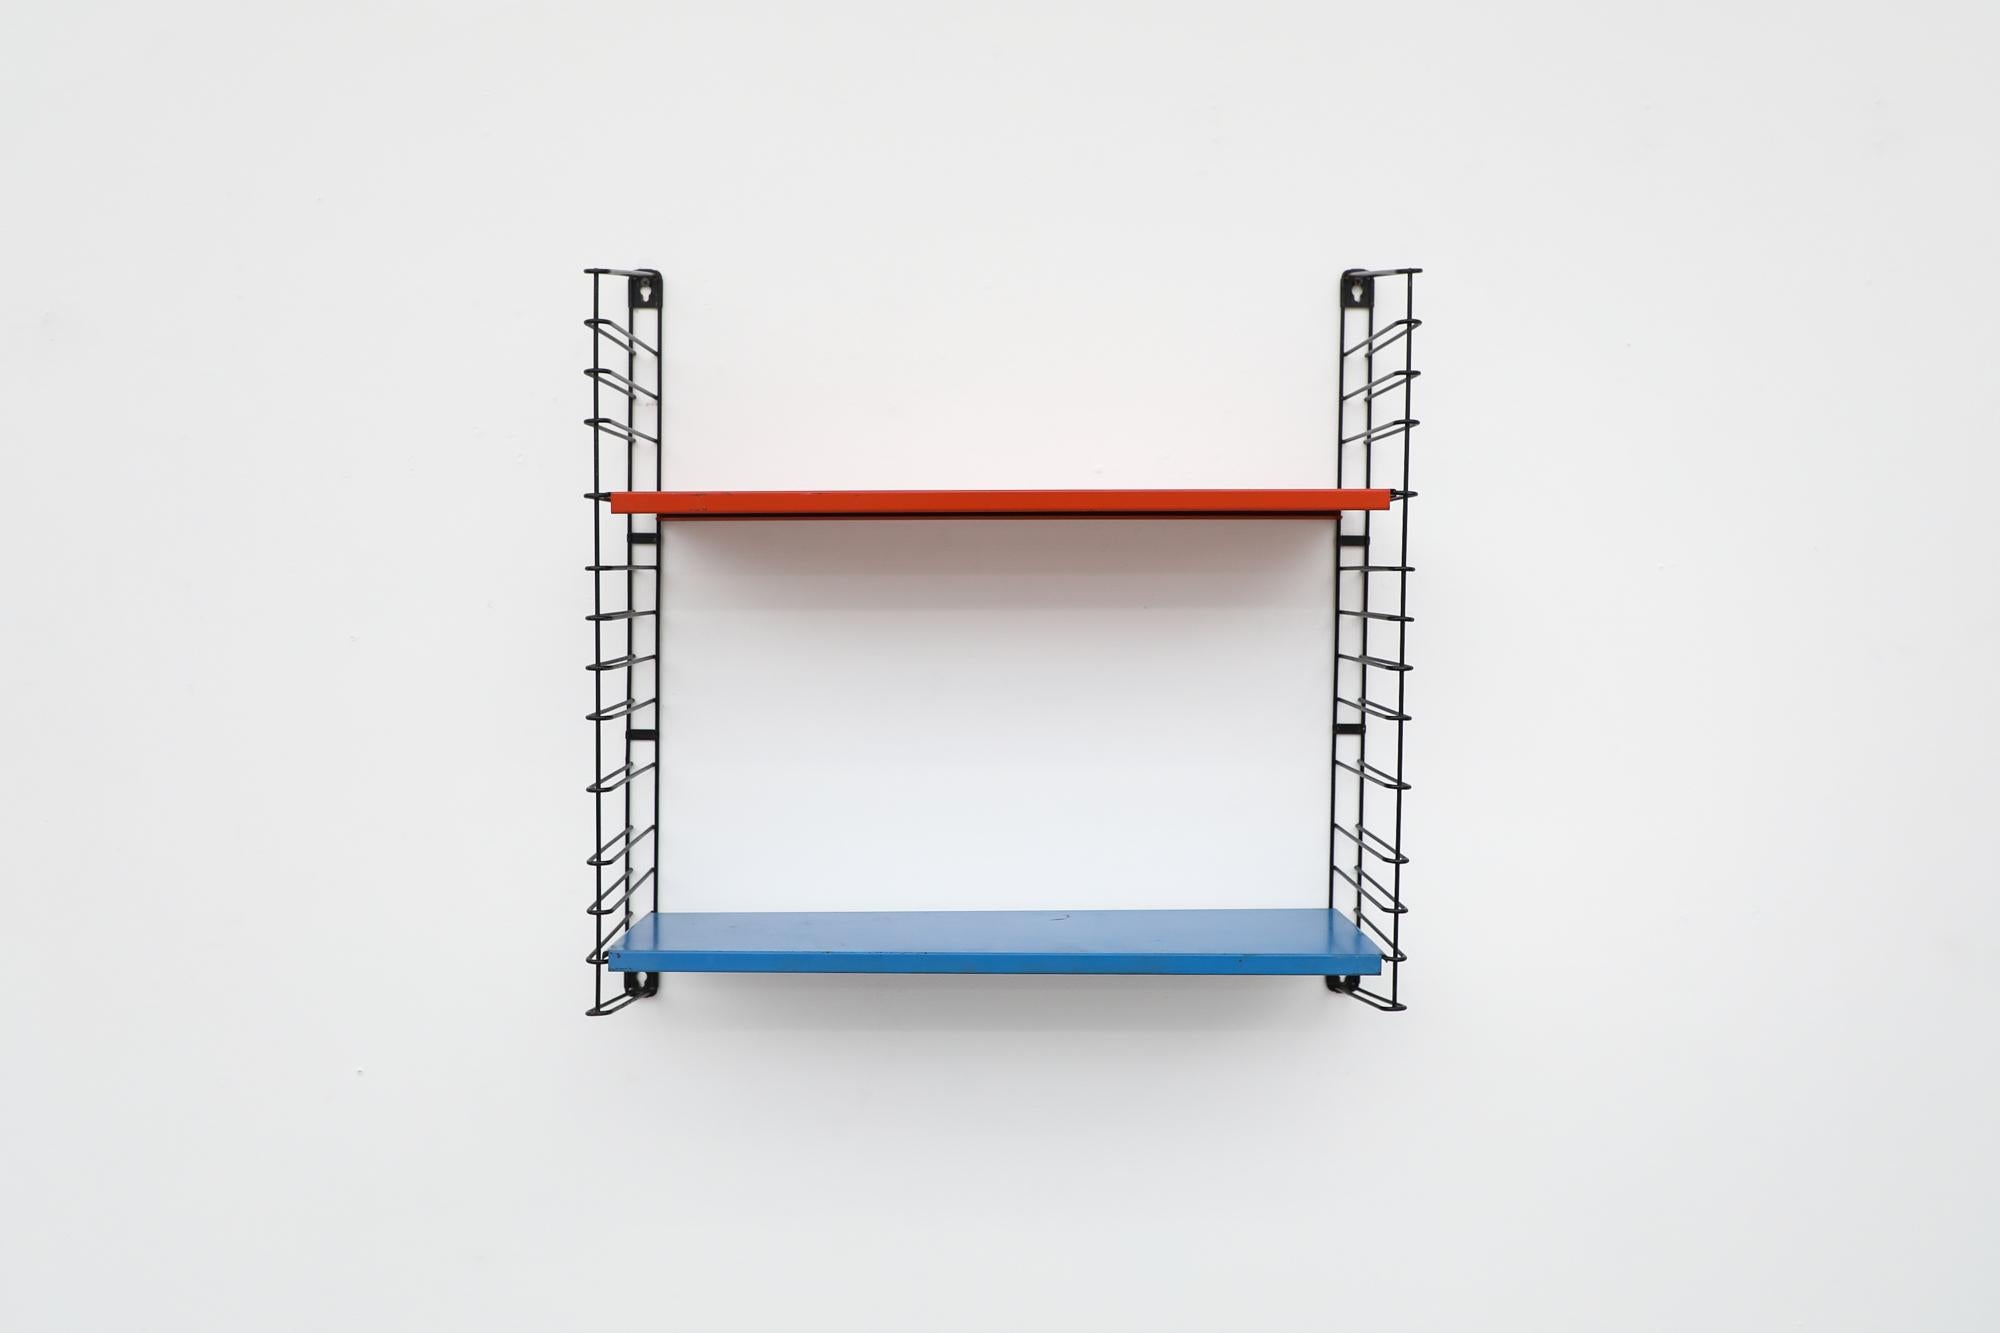 Midcentury TOMADO industrial shelving with red and bright blue shelves on black enameled metal wire risers. Designed by Jan van der Togt. The shelves rest on the wire risers and can be arranged to different heights. In original condition with